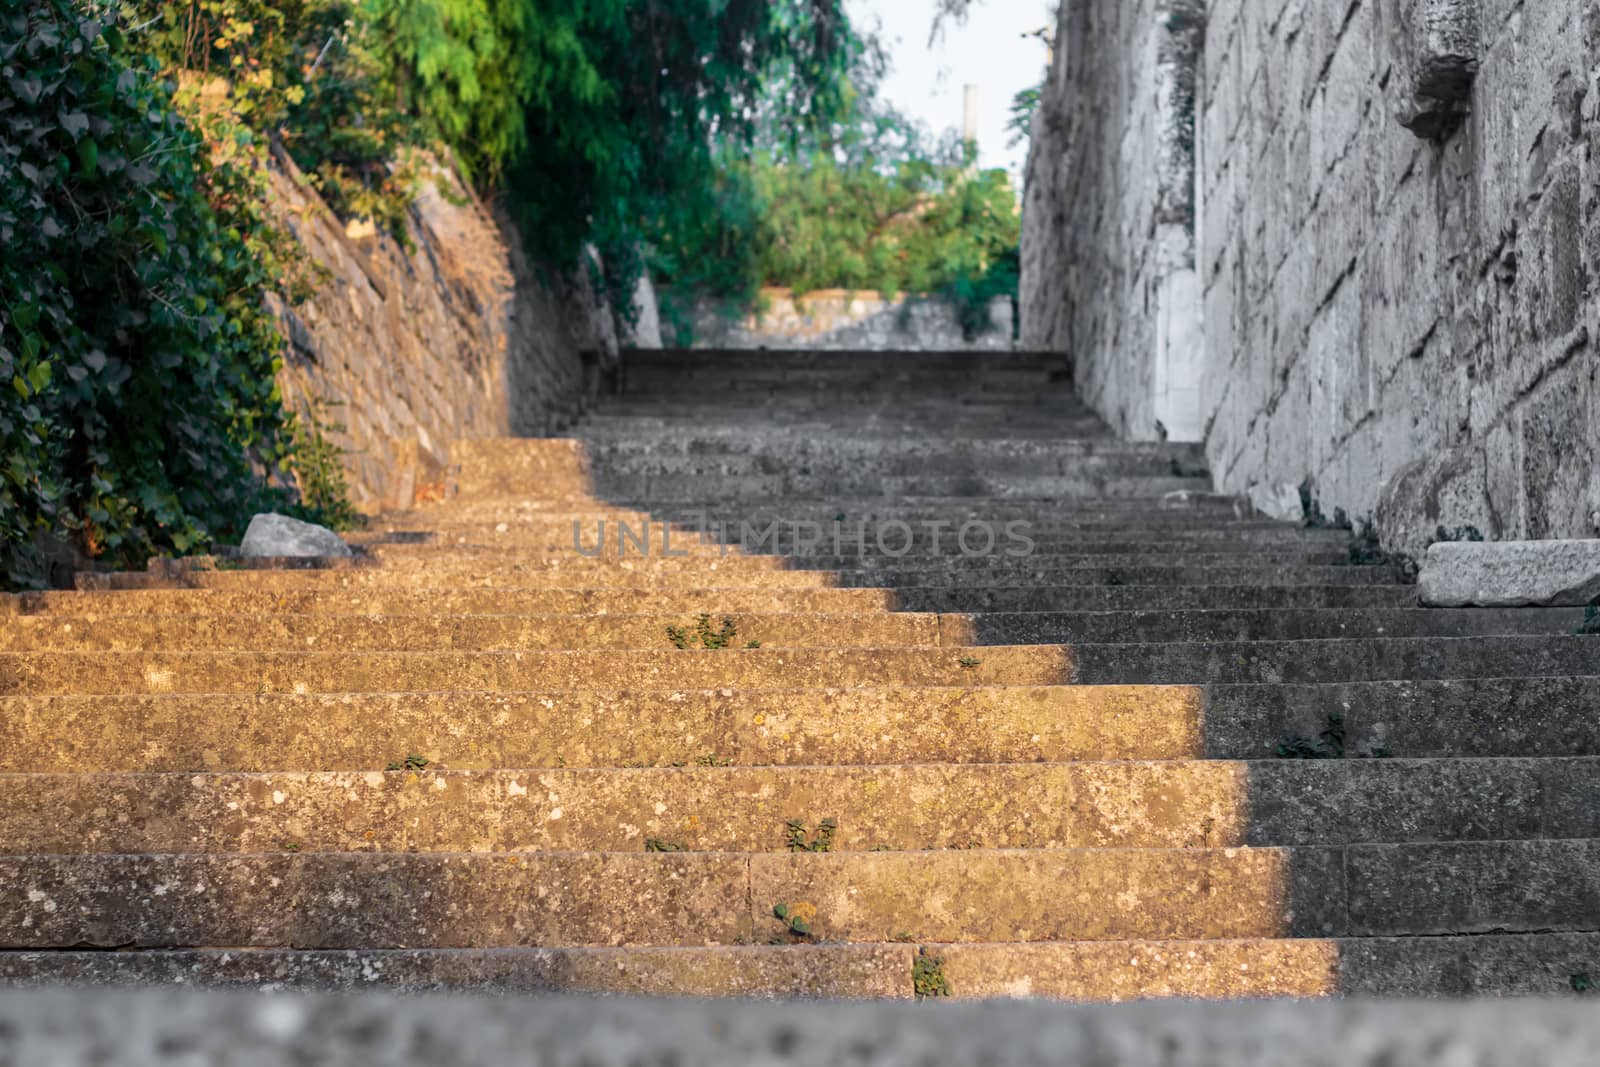 a very nice looking half colored half black and white stone stairs. photo has taken at izmir/turkey.